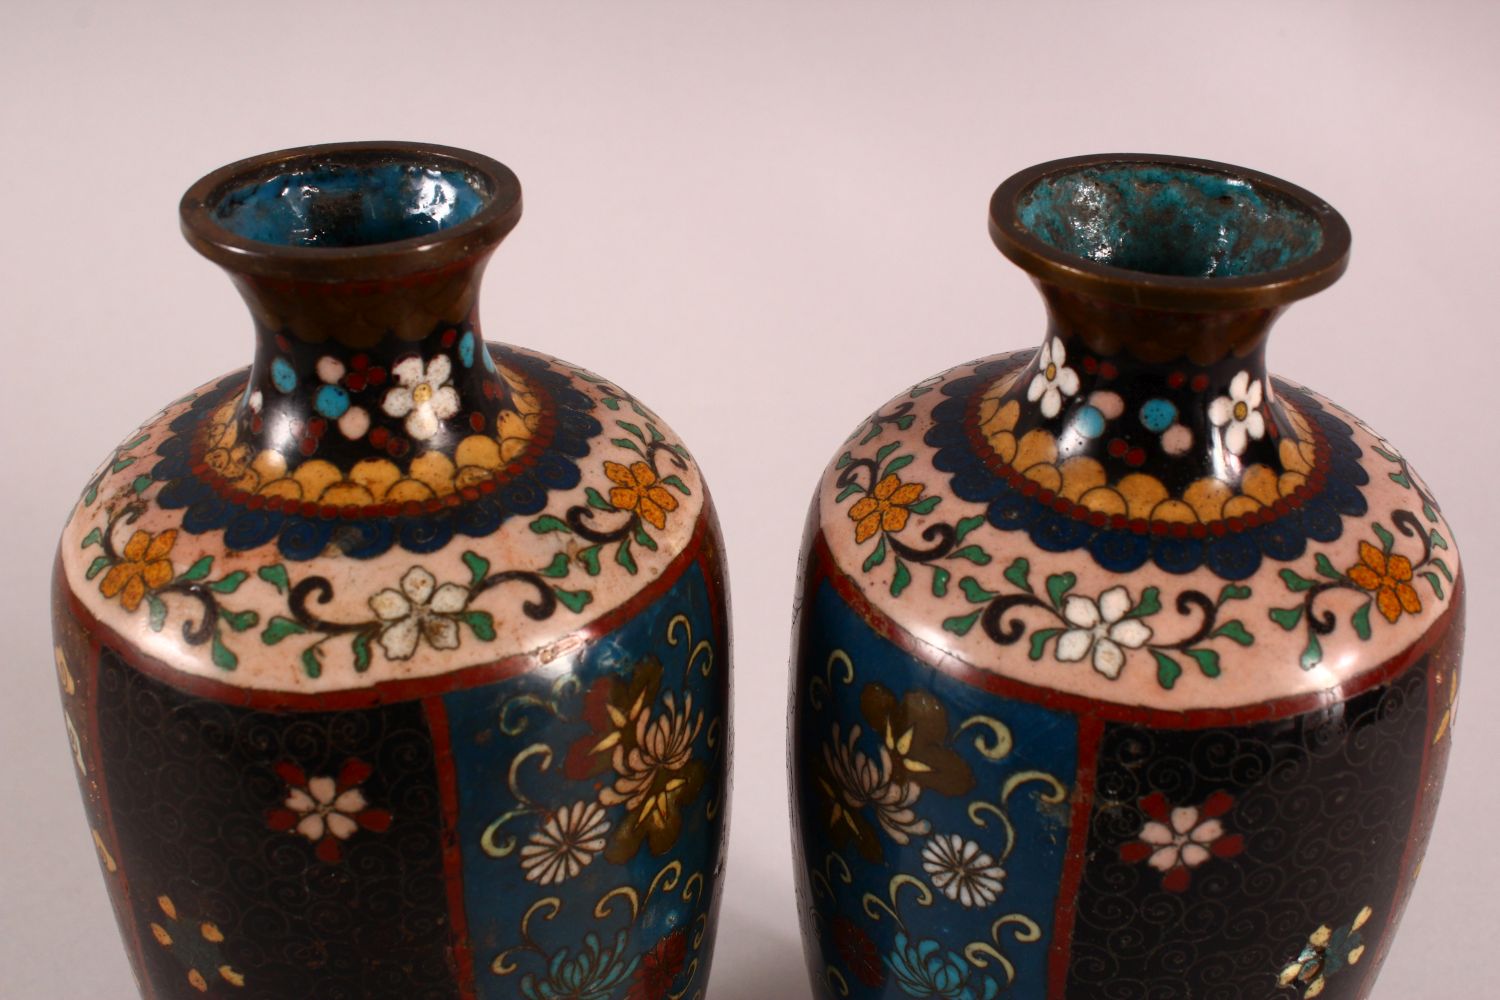 A PAIR OF JAPANESE CLOISONNE VASES, decorated with phoenix, flowers and butterflies, 22cm high. - Image 5 of 6